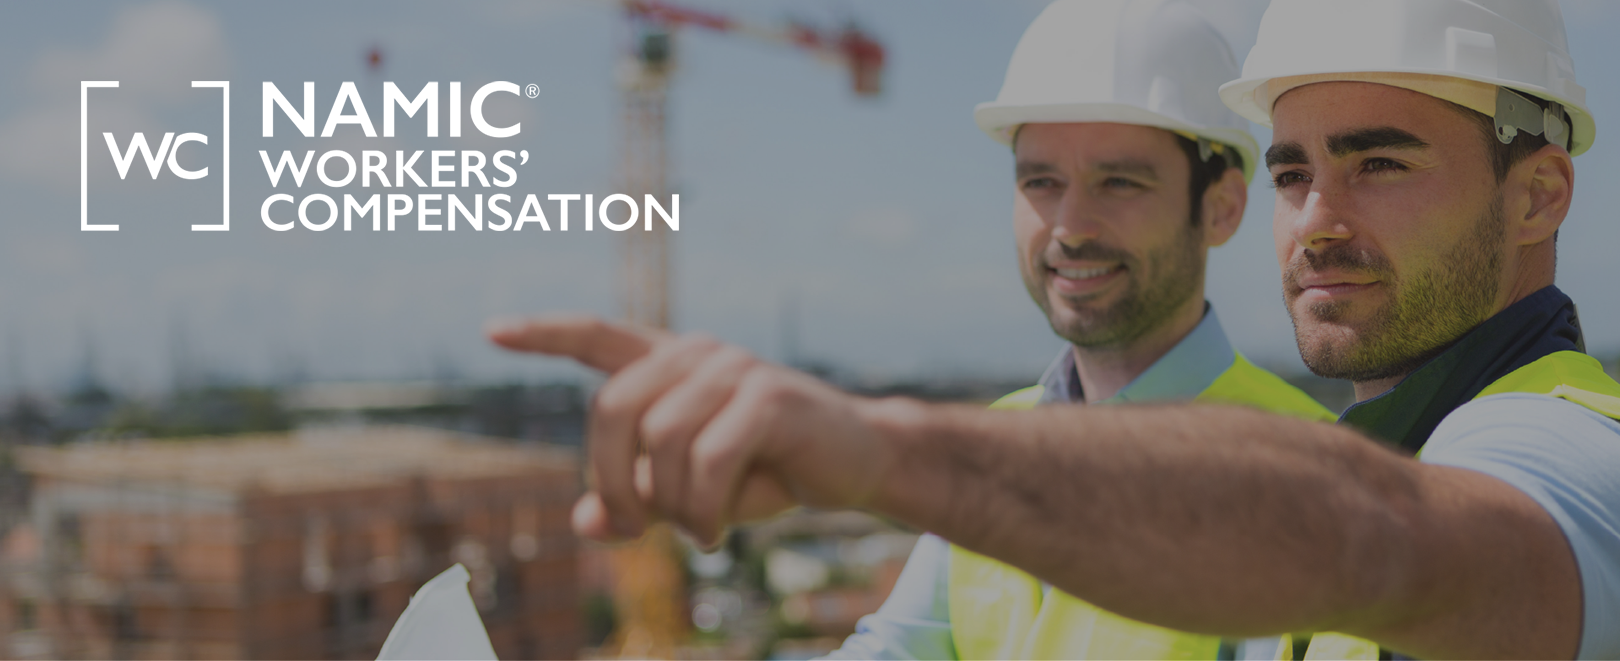 NAMIC Workers' Compensation